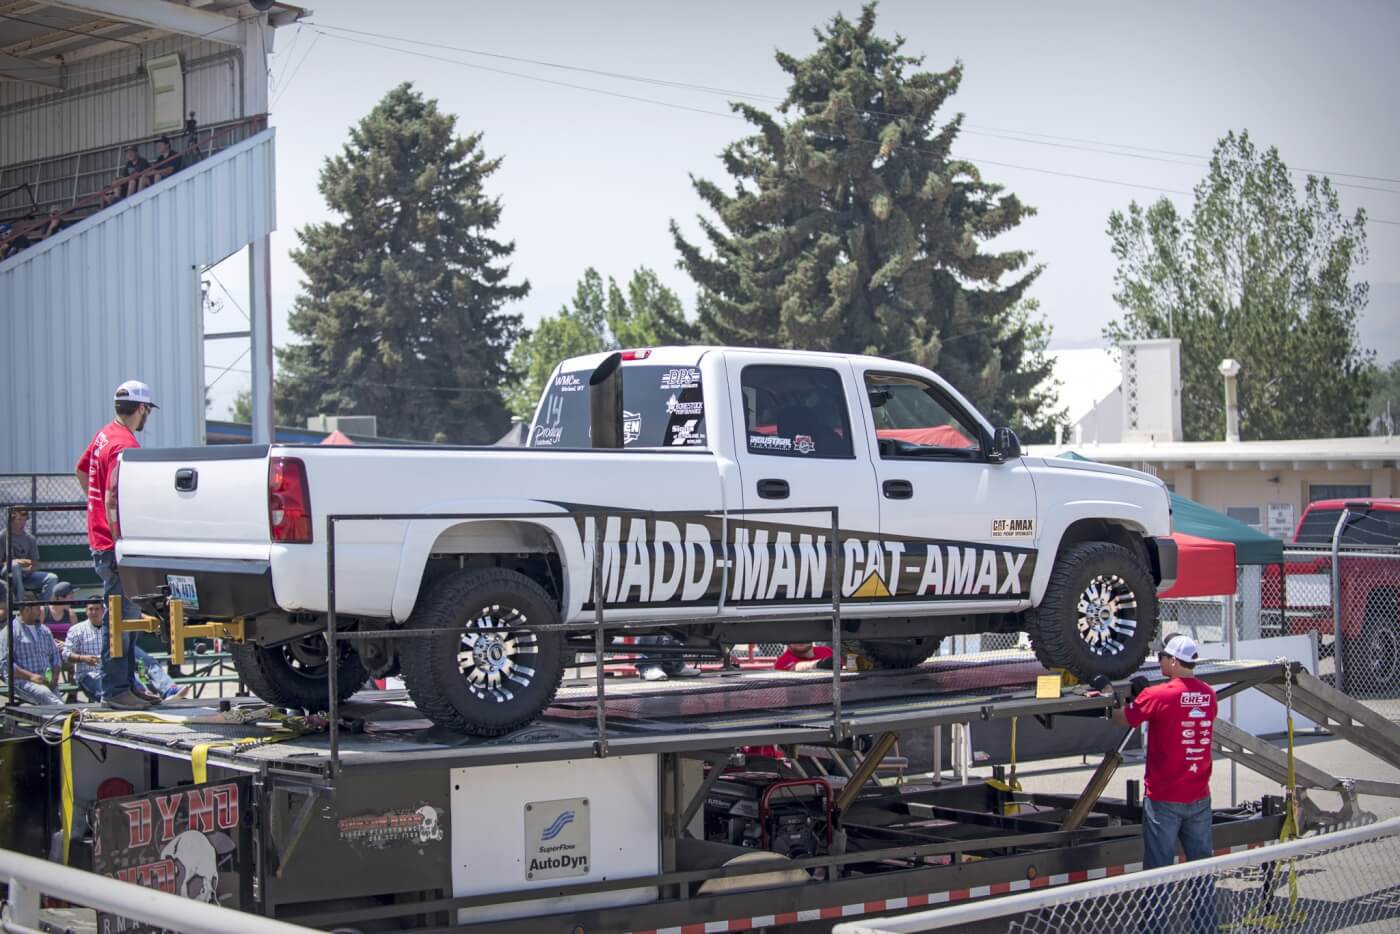 The dyno competition was held at the Power County Fairgrounds beside the dirt track where the evening pull and drag race were held. Trucks ran on Custom Auto's portable chassis dyno throughout the day, with a handful surpassing the 1,000-horsepower mark.